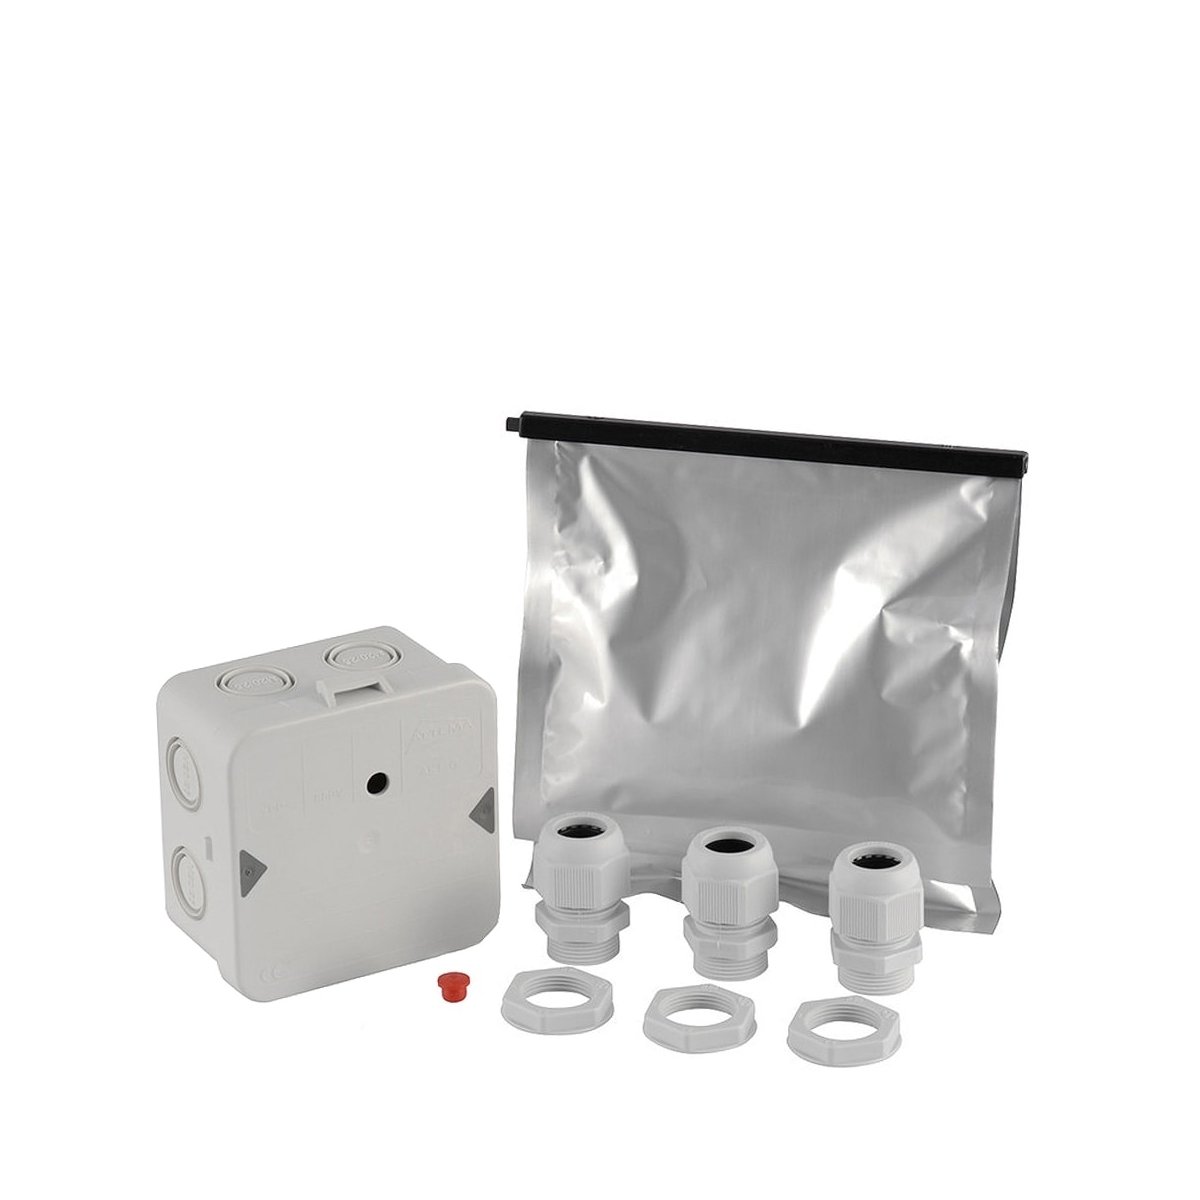 Outdoor Lighting Connection Material Ground junction box waterproof - 10-piece